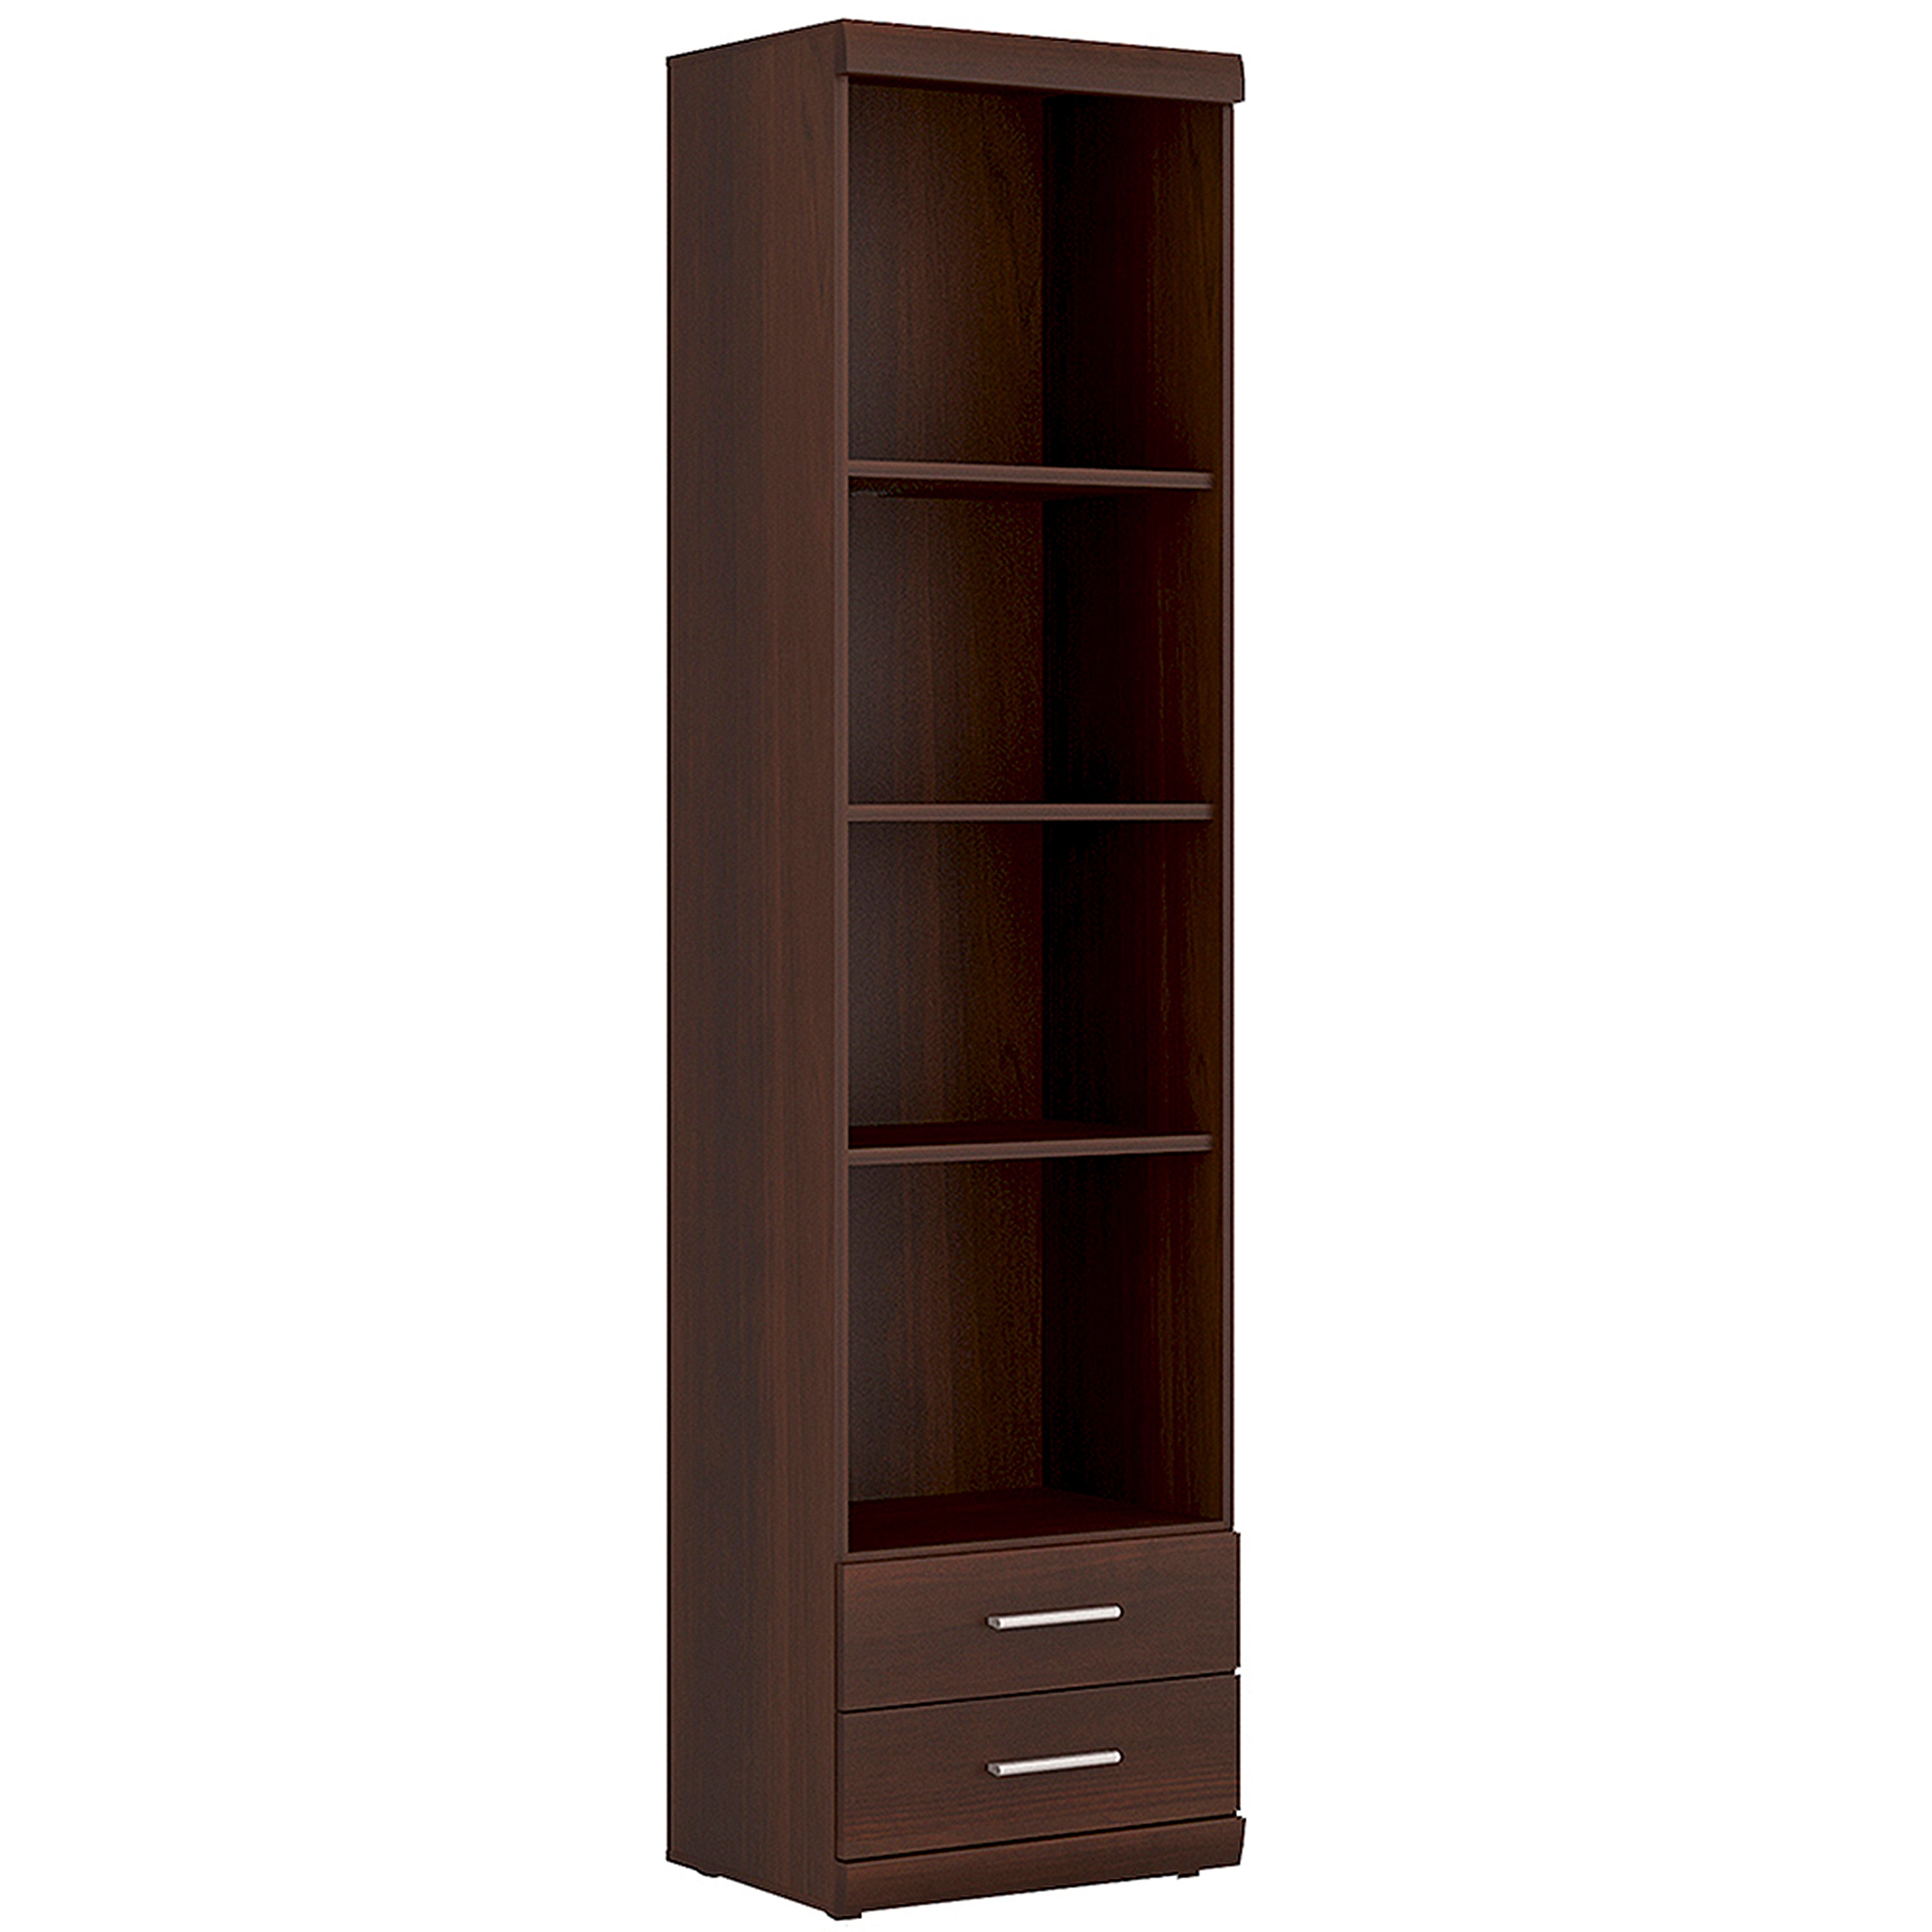 Image of Imperial Tall 2 Drawer Narrow Cabinet With Shelves